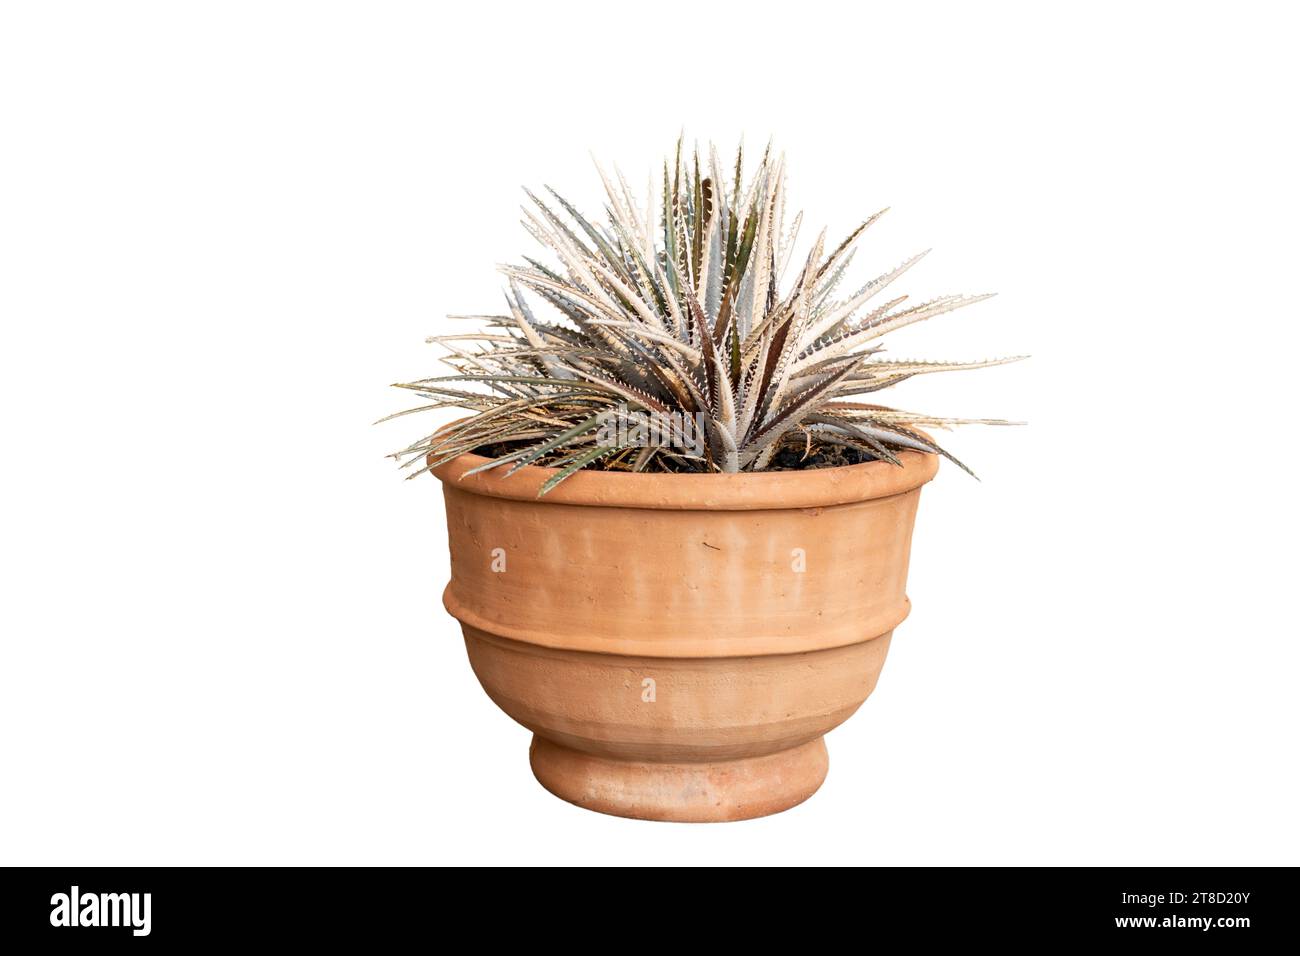 Dyckia sawblade bromeliad plant in large clay pot on white isolated background Stock Photo